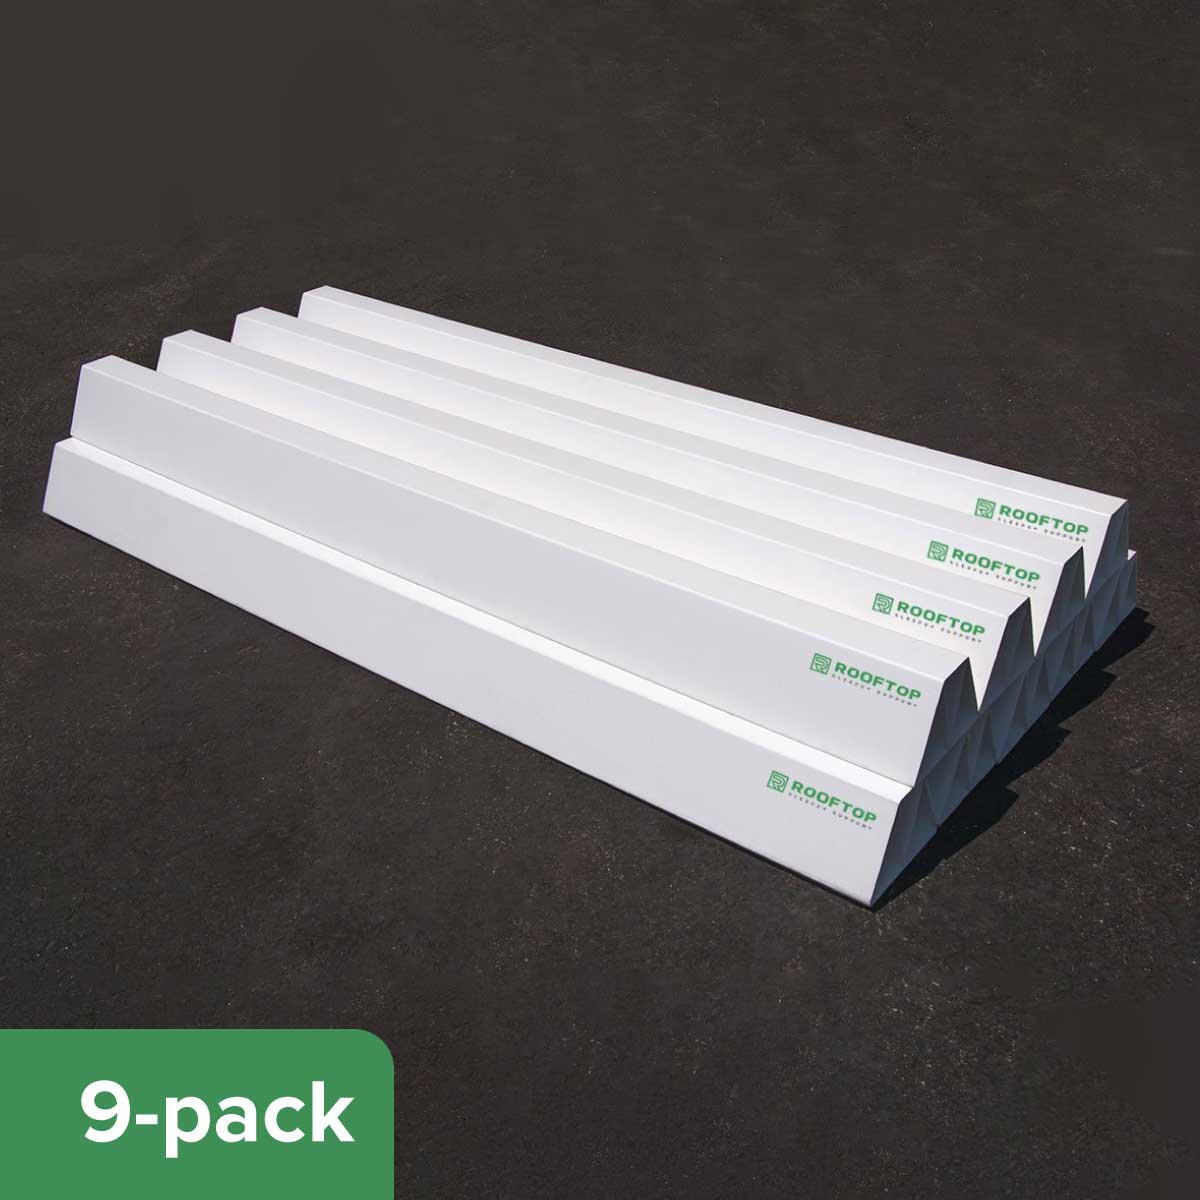 RSS-3 PVC Rooftop Pipe Support | Affordable pipe block that can be cut to desired length